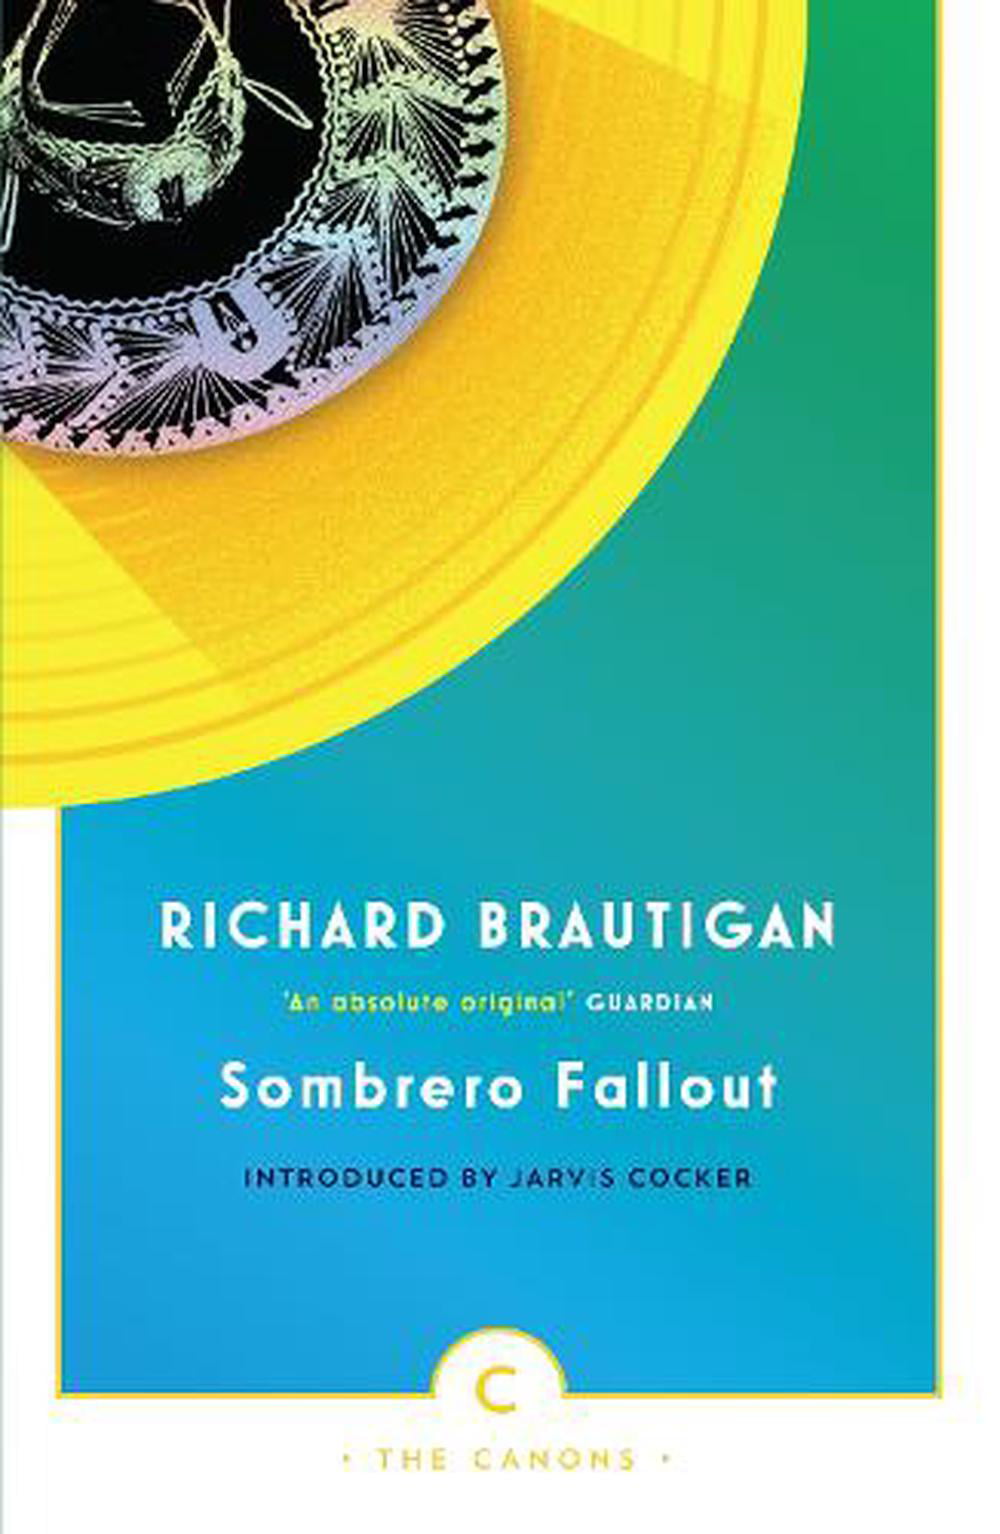 With other bands Slovenia The beginning Canons: Sombrero Fallout. Richard Brautigan (Paperback) - Walmart.com